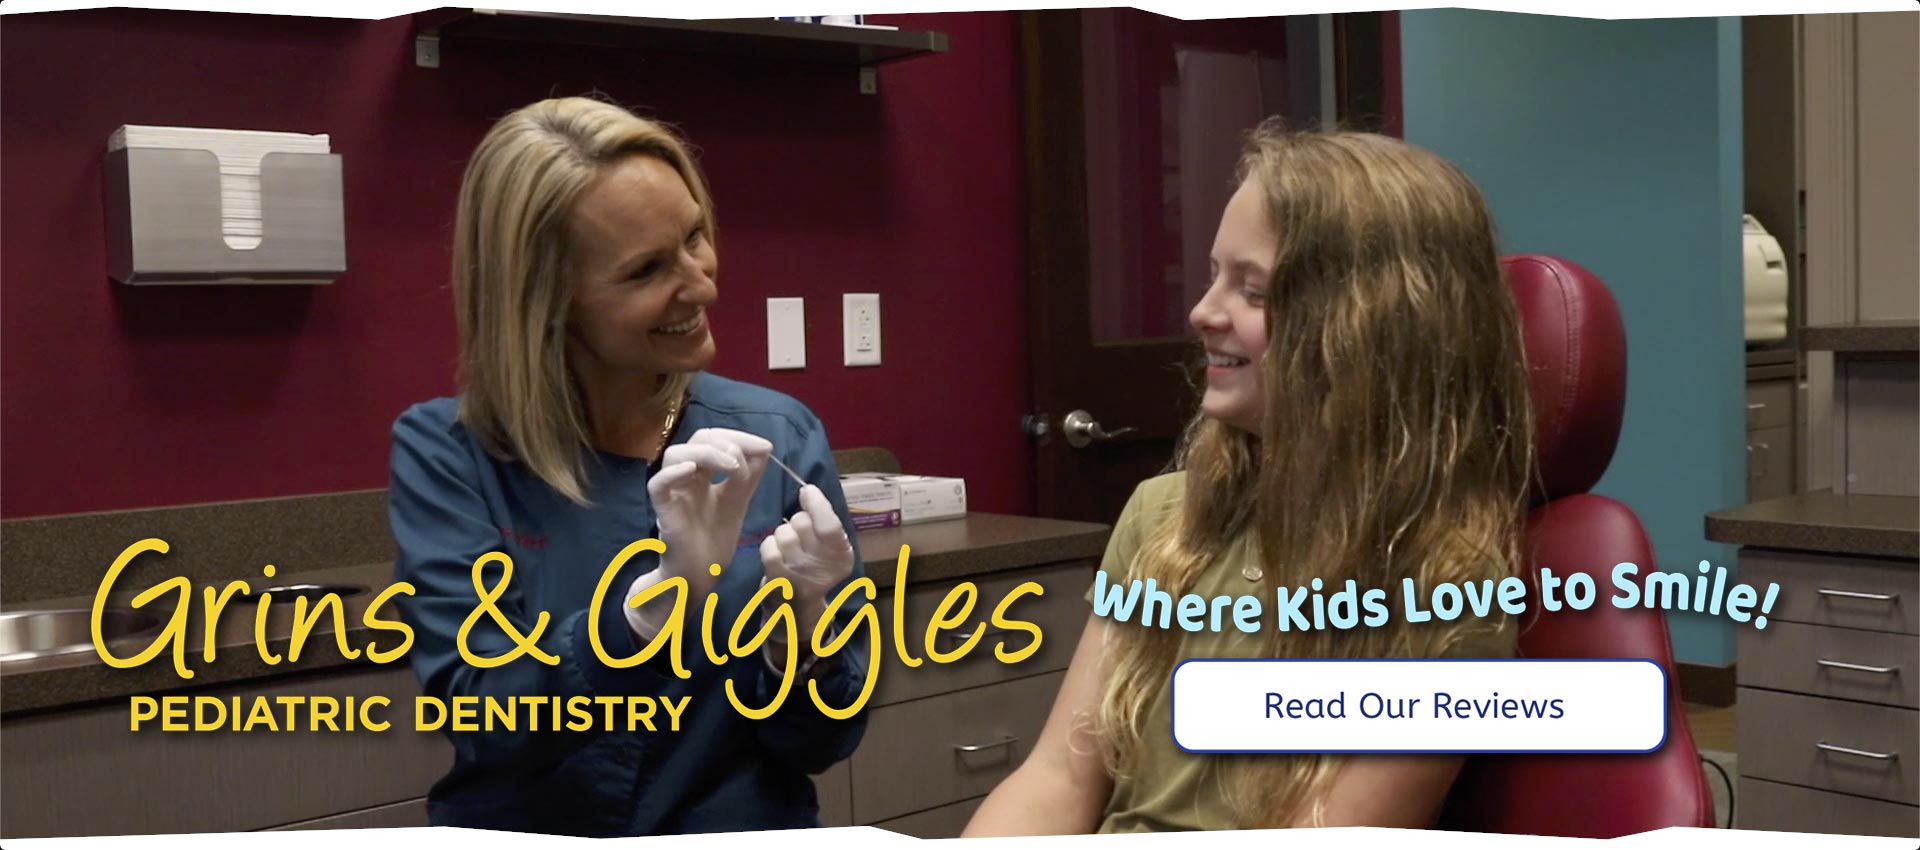 Grins and Giggles Pediatric Dentistry - Where Kids Come to Smile